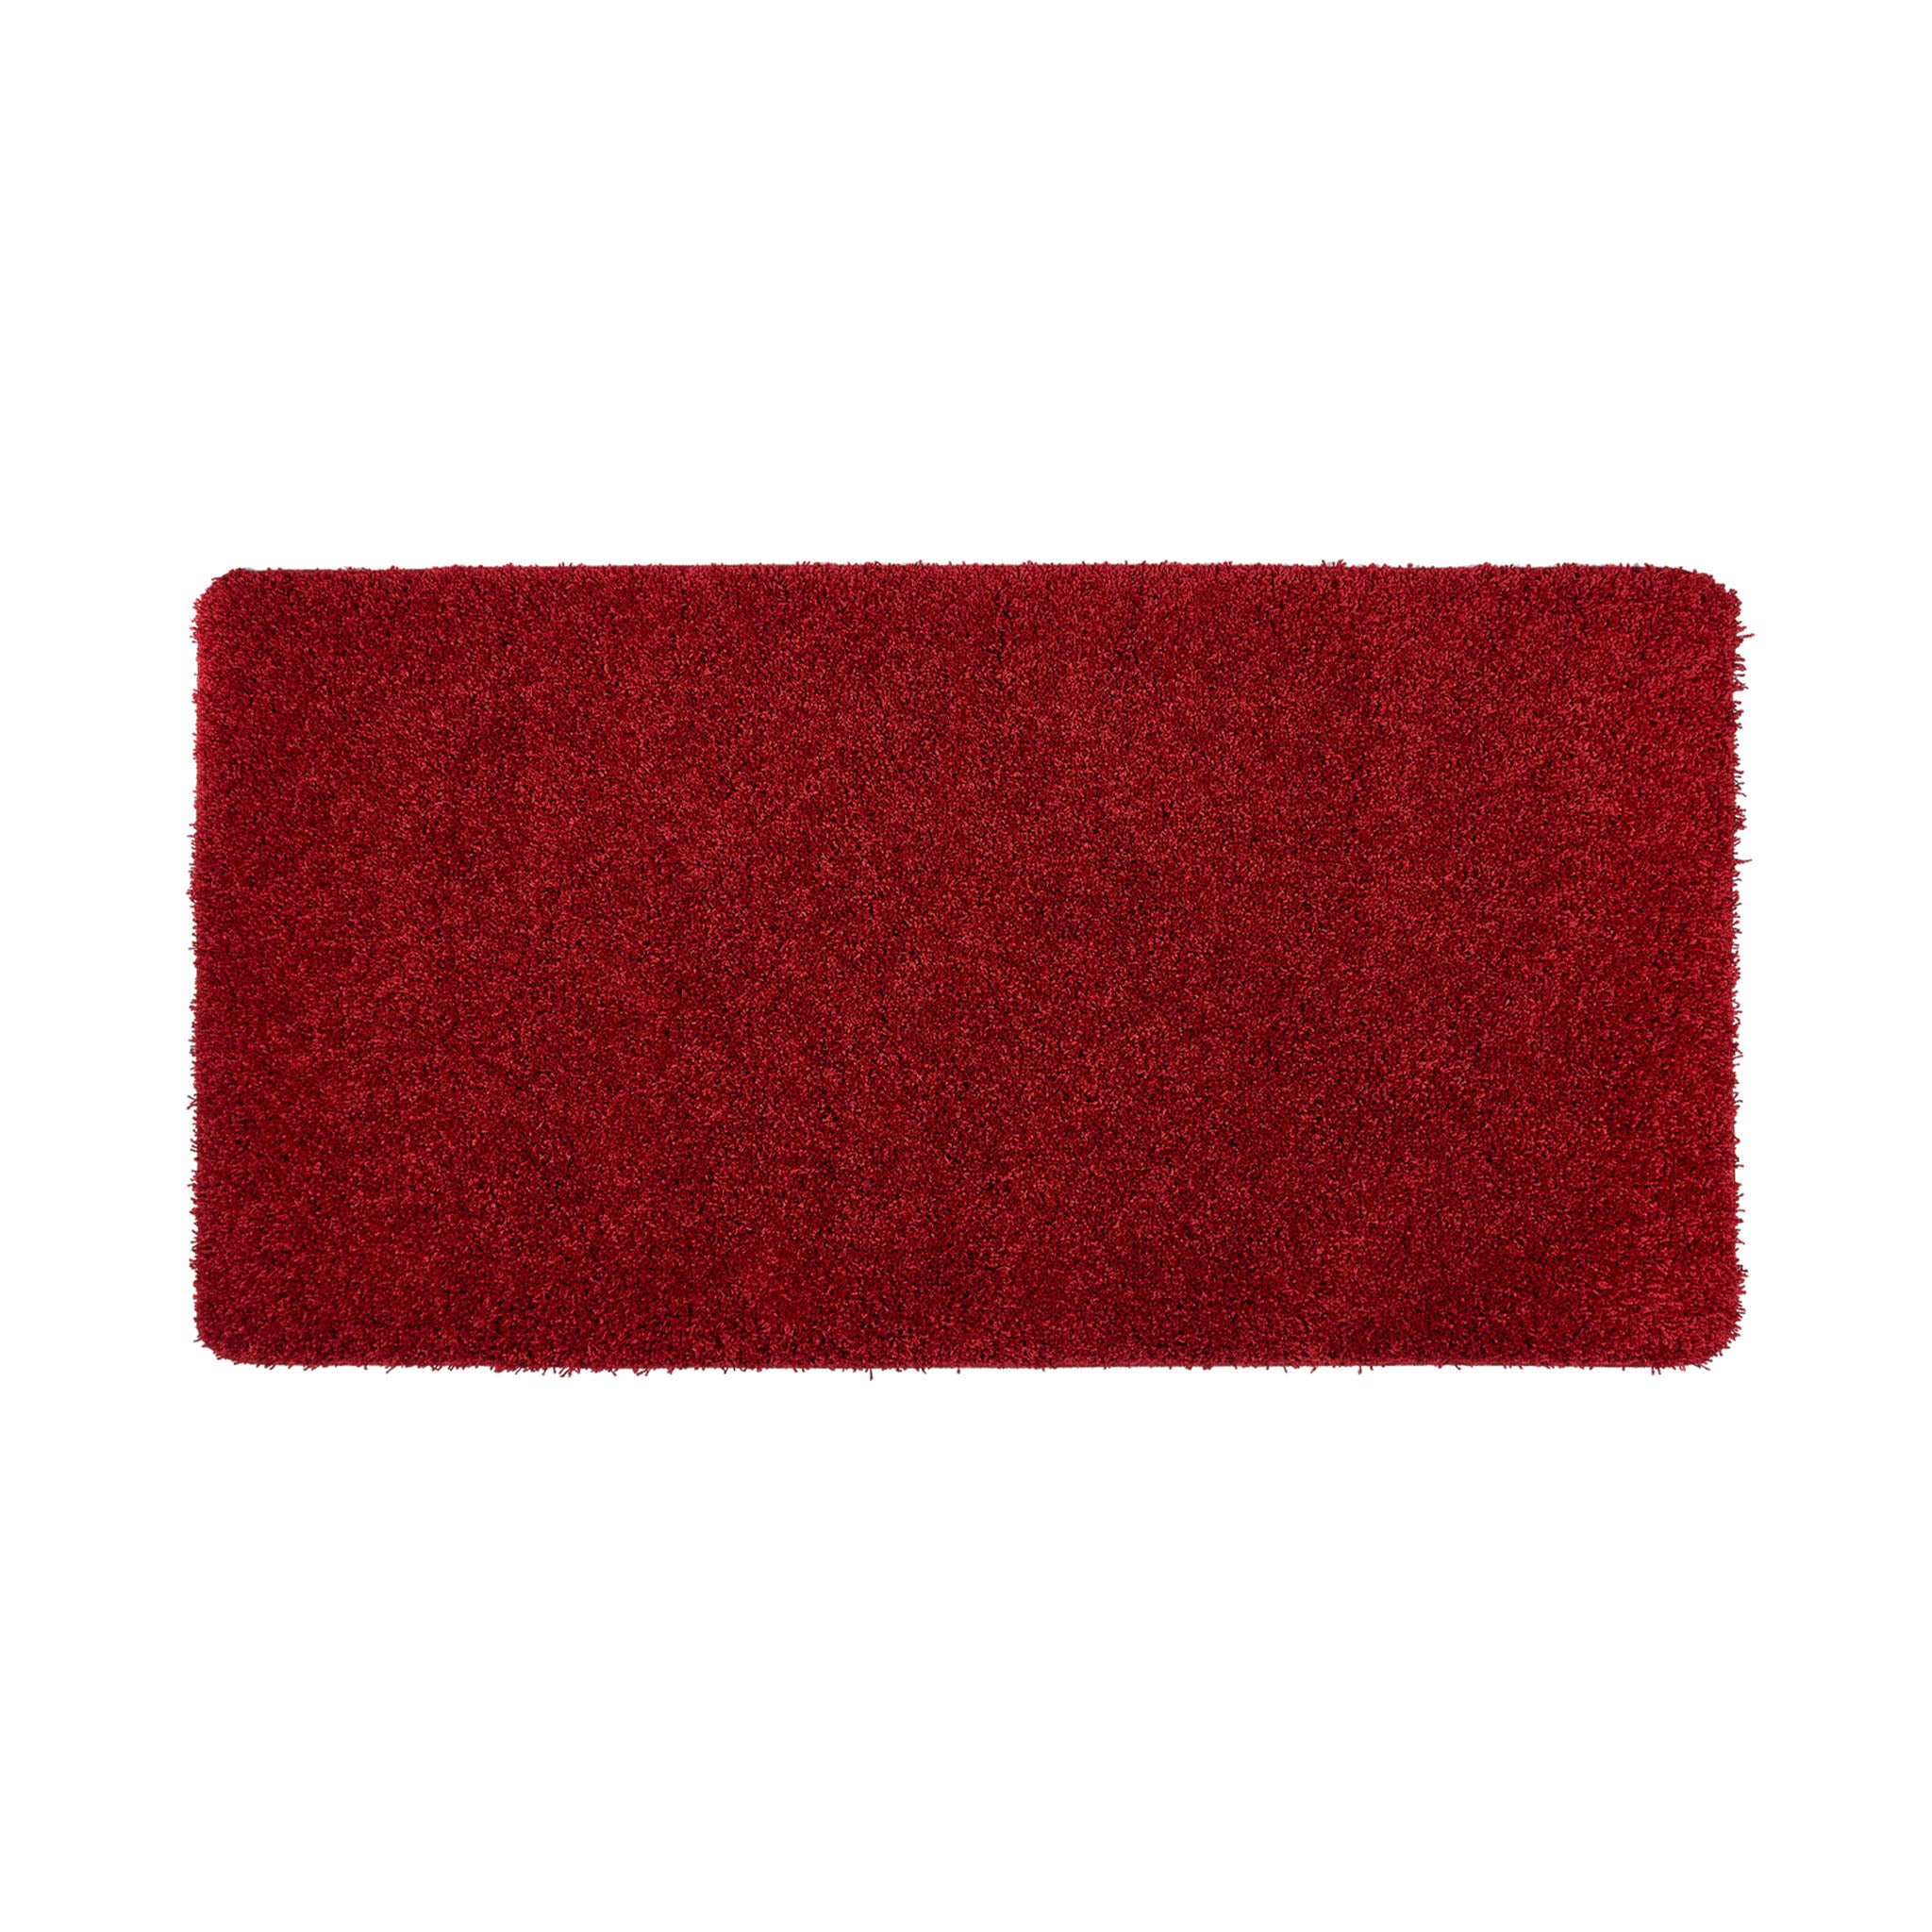 My Rug Red